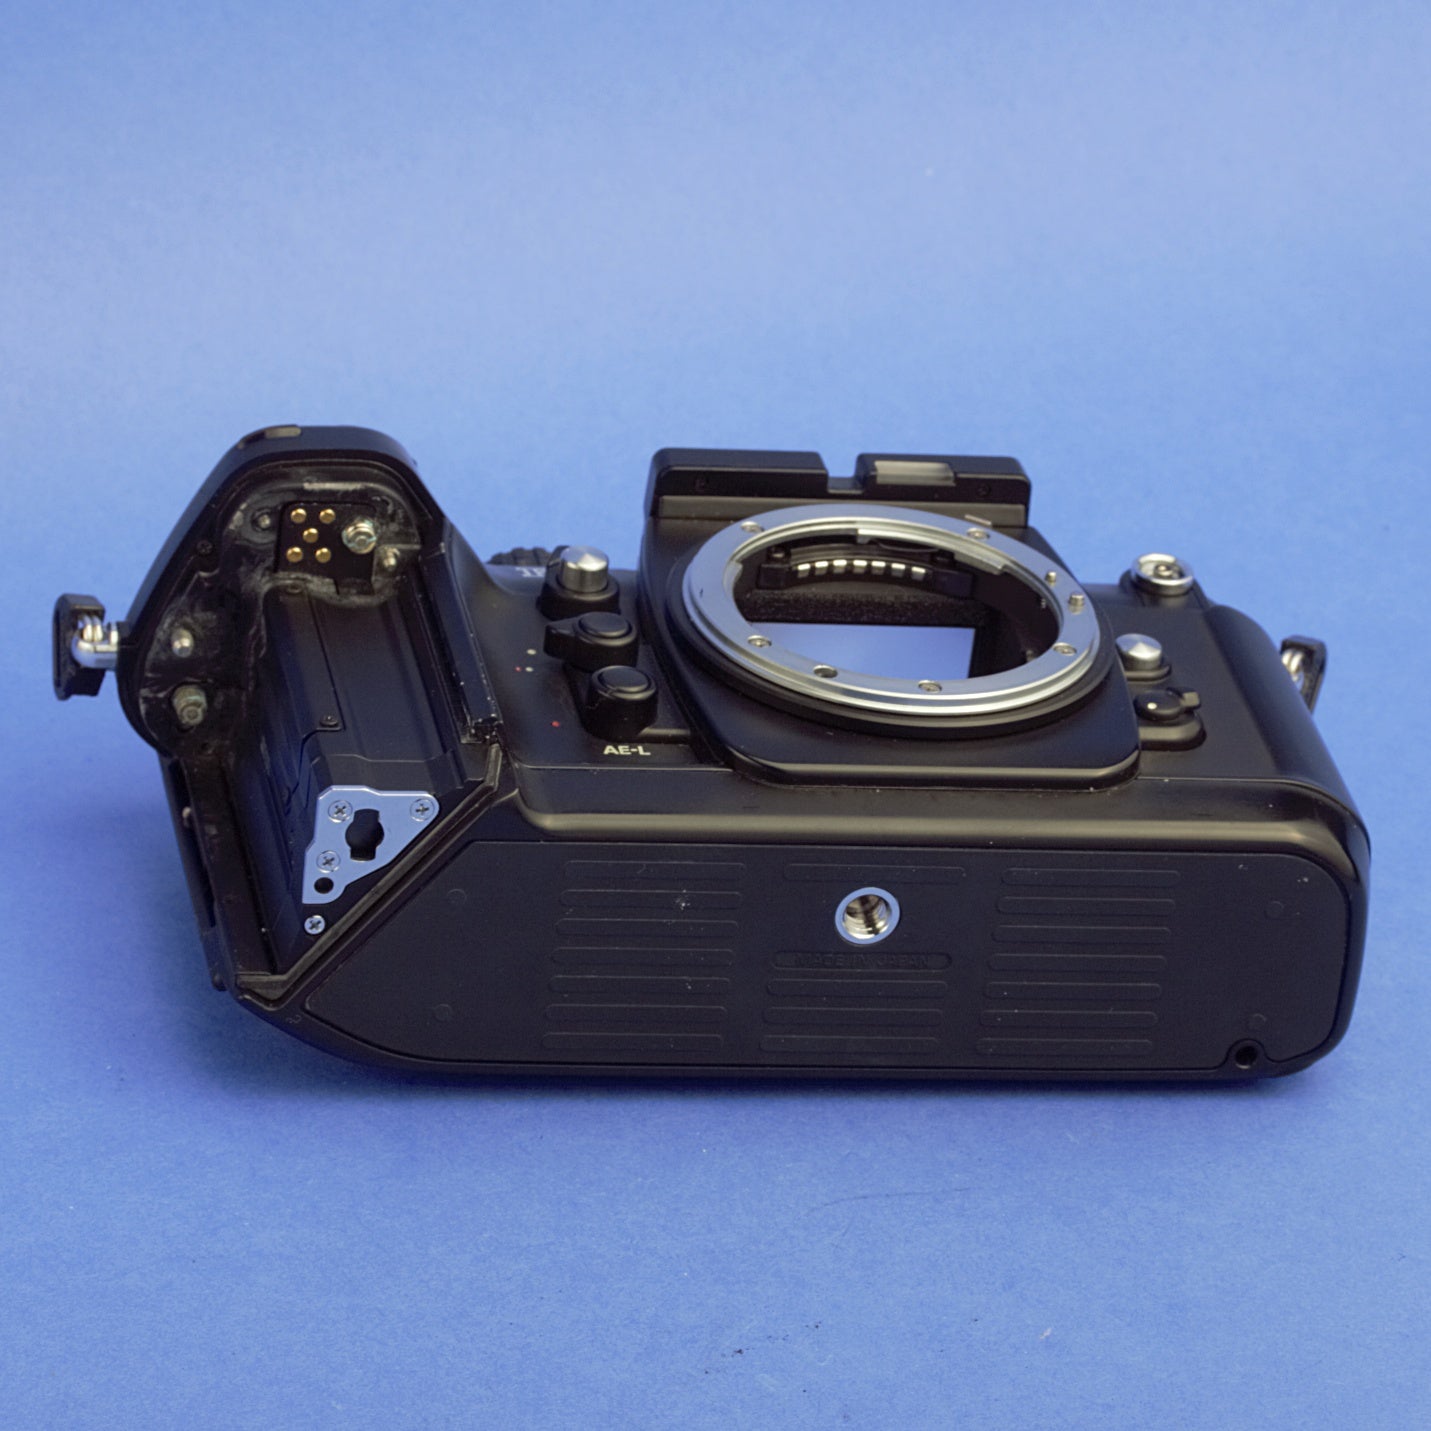 Nikon F4 Film Camera Body Only Not Working